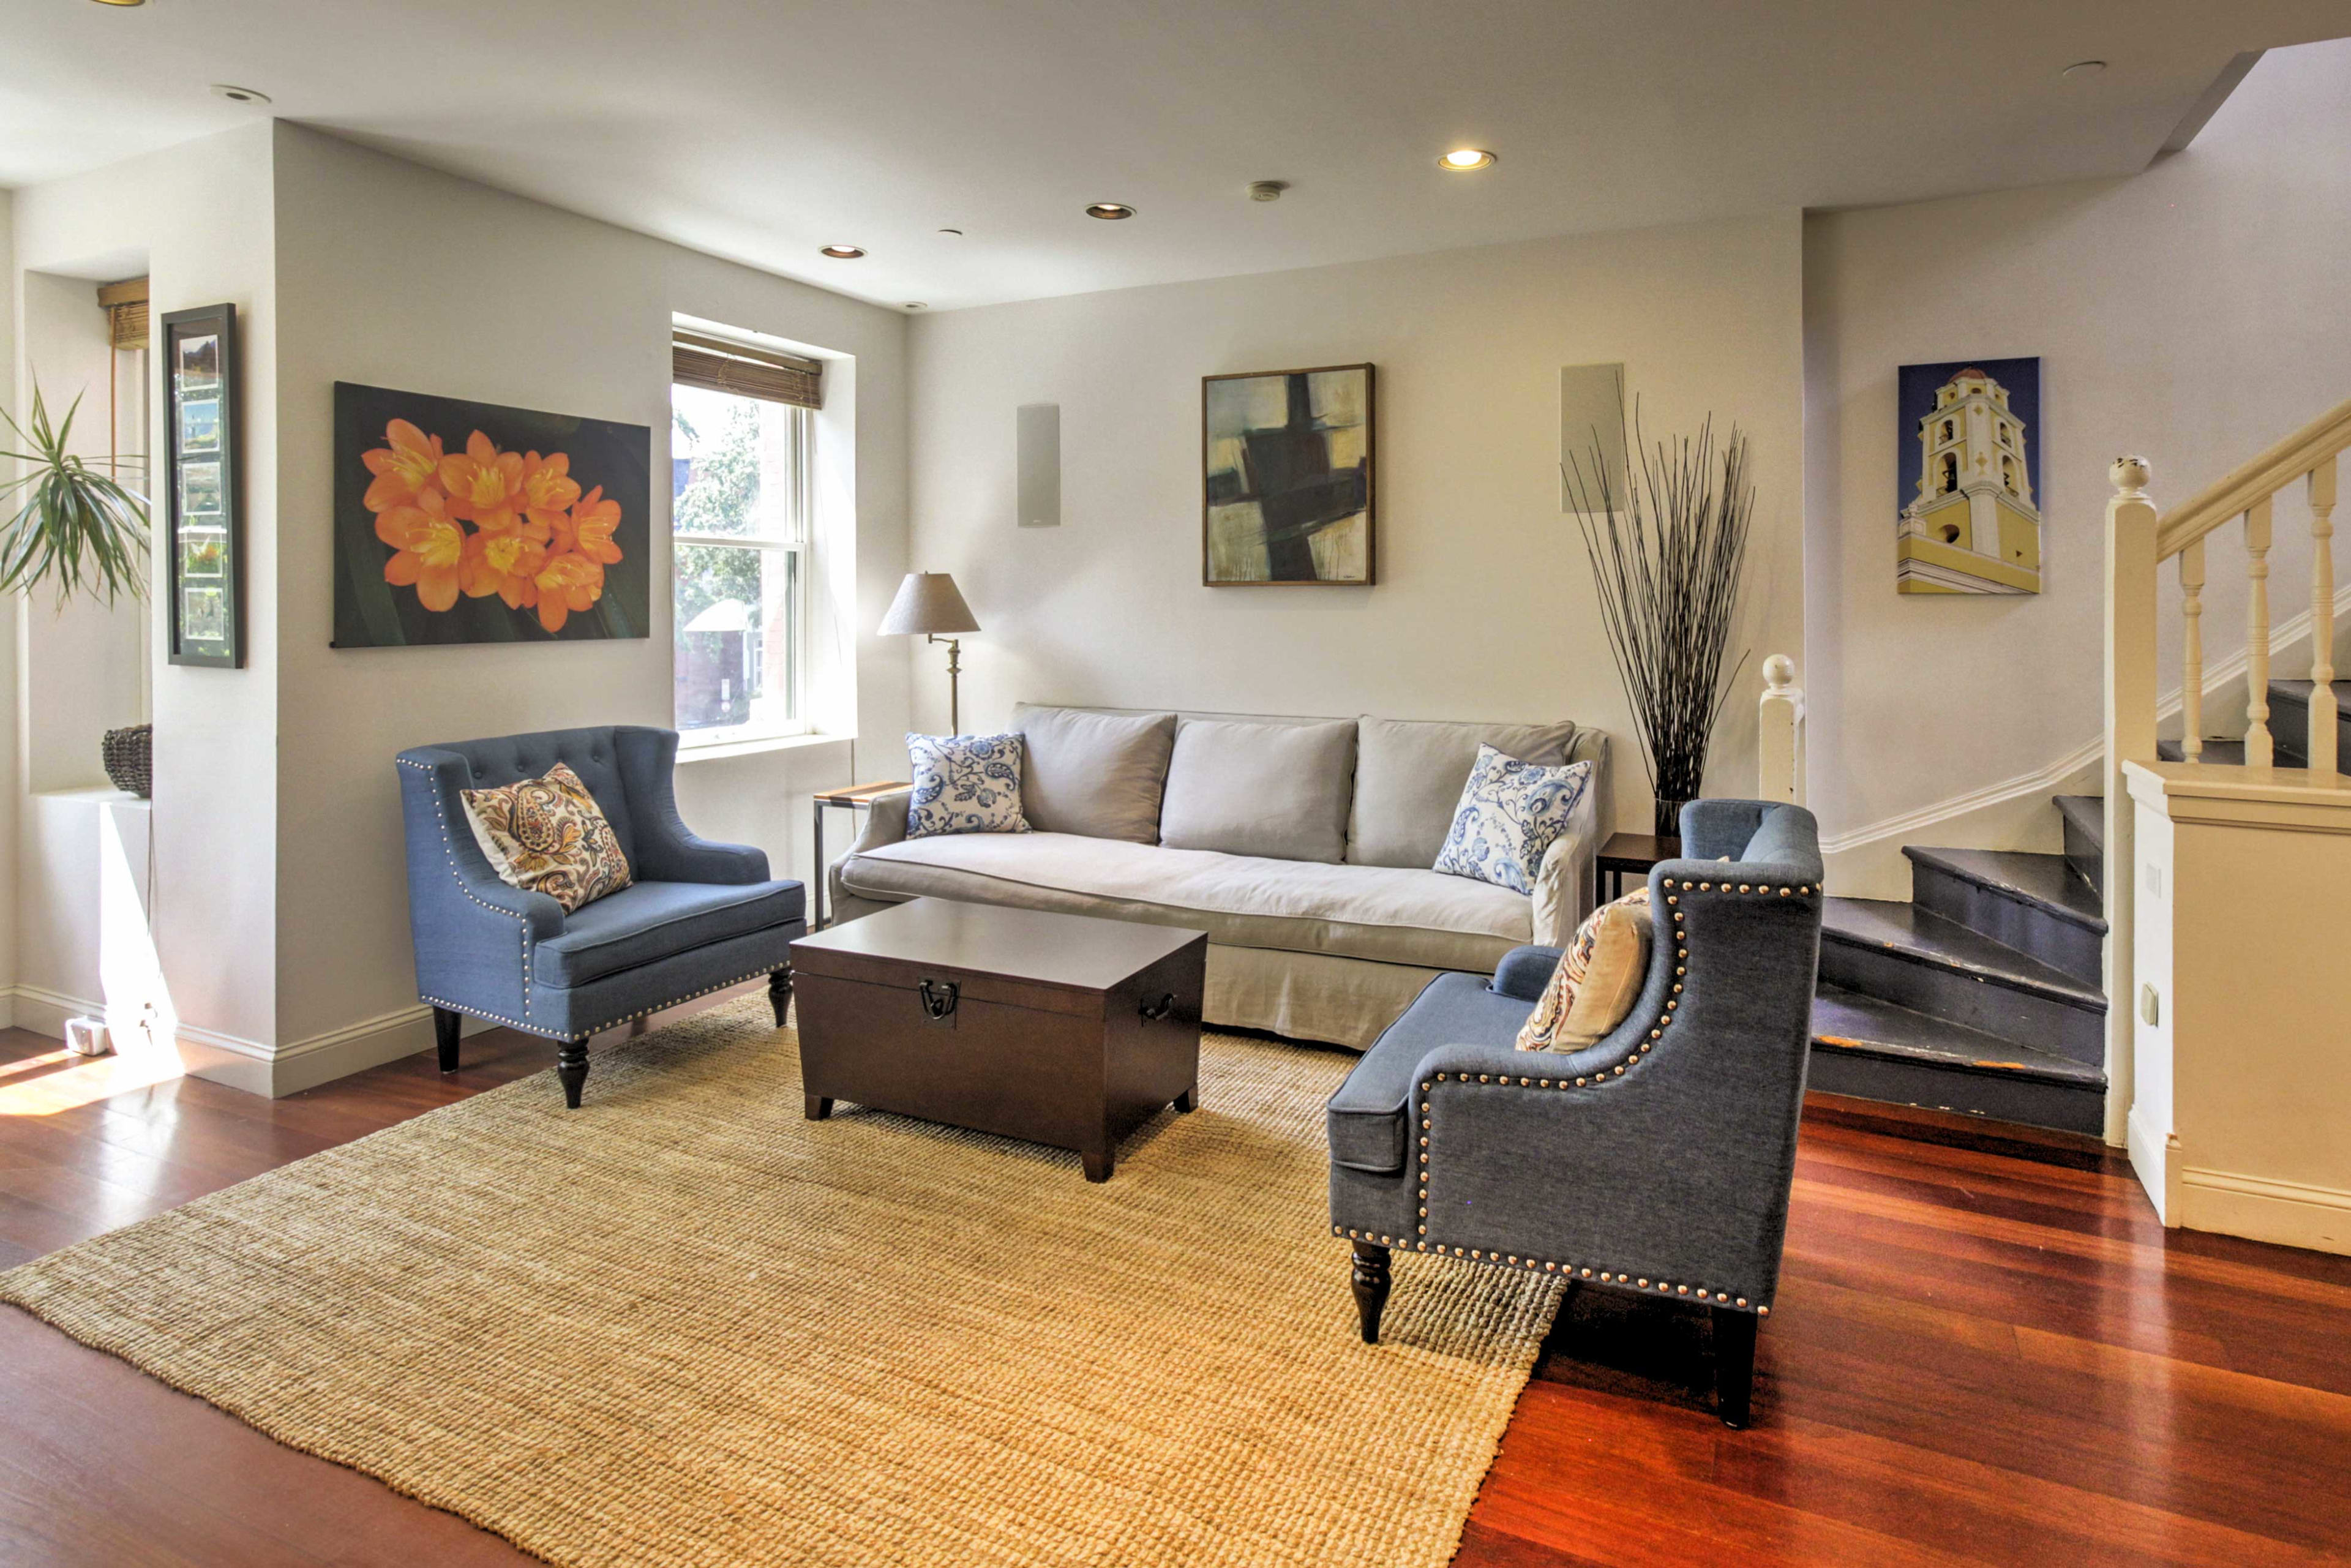 During your downtime, relax in the bright and open living room.